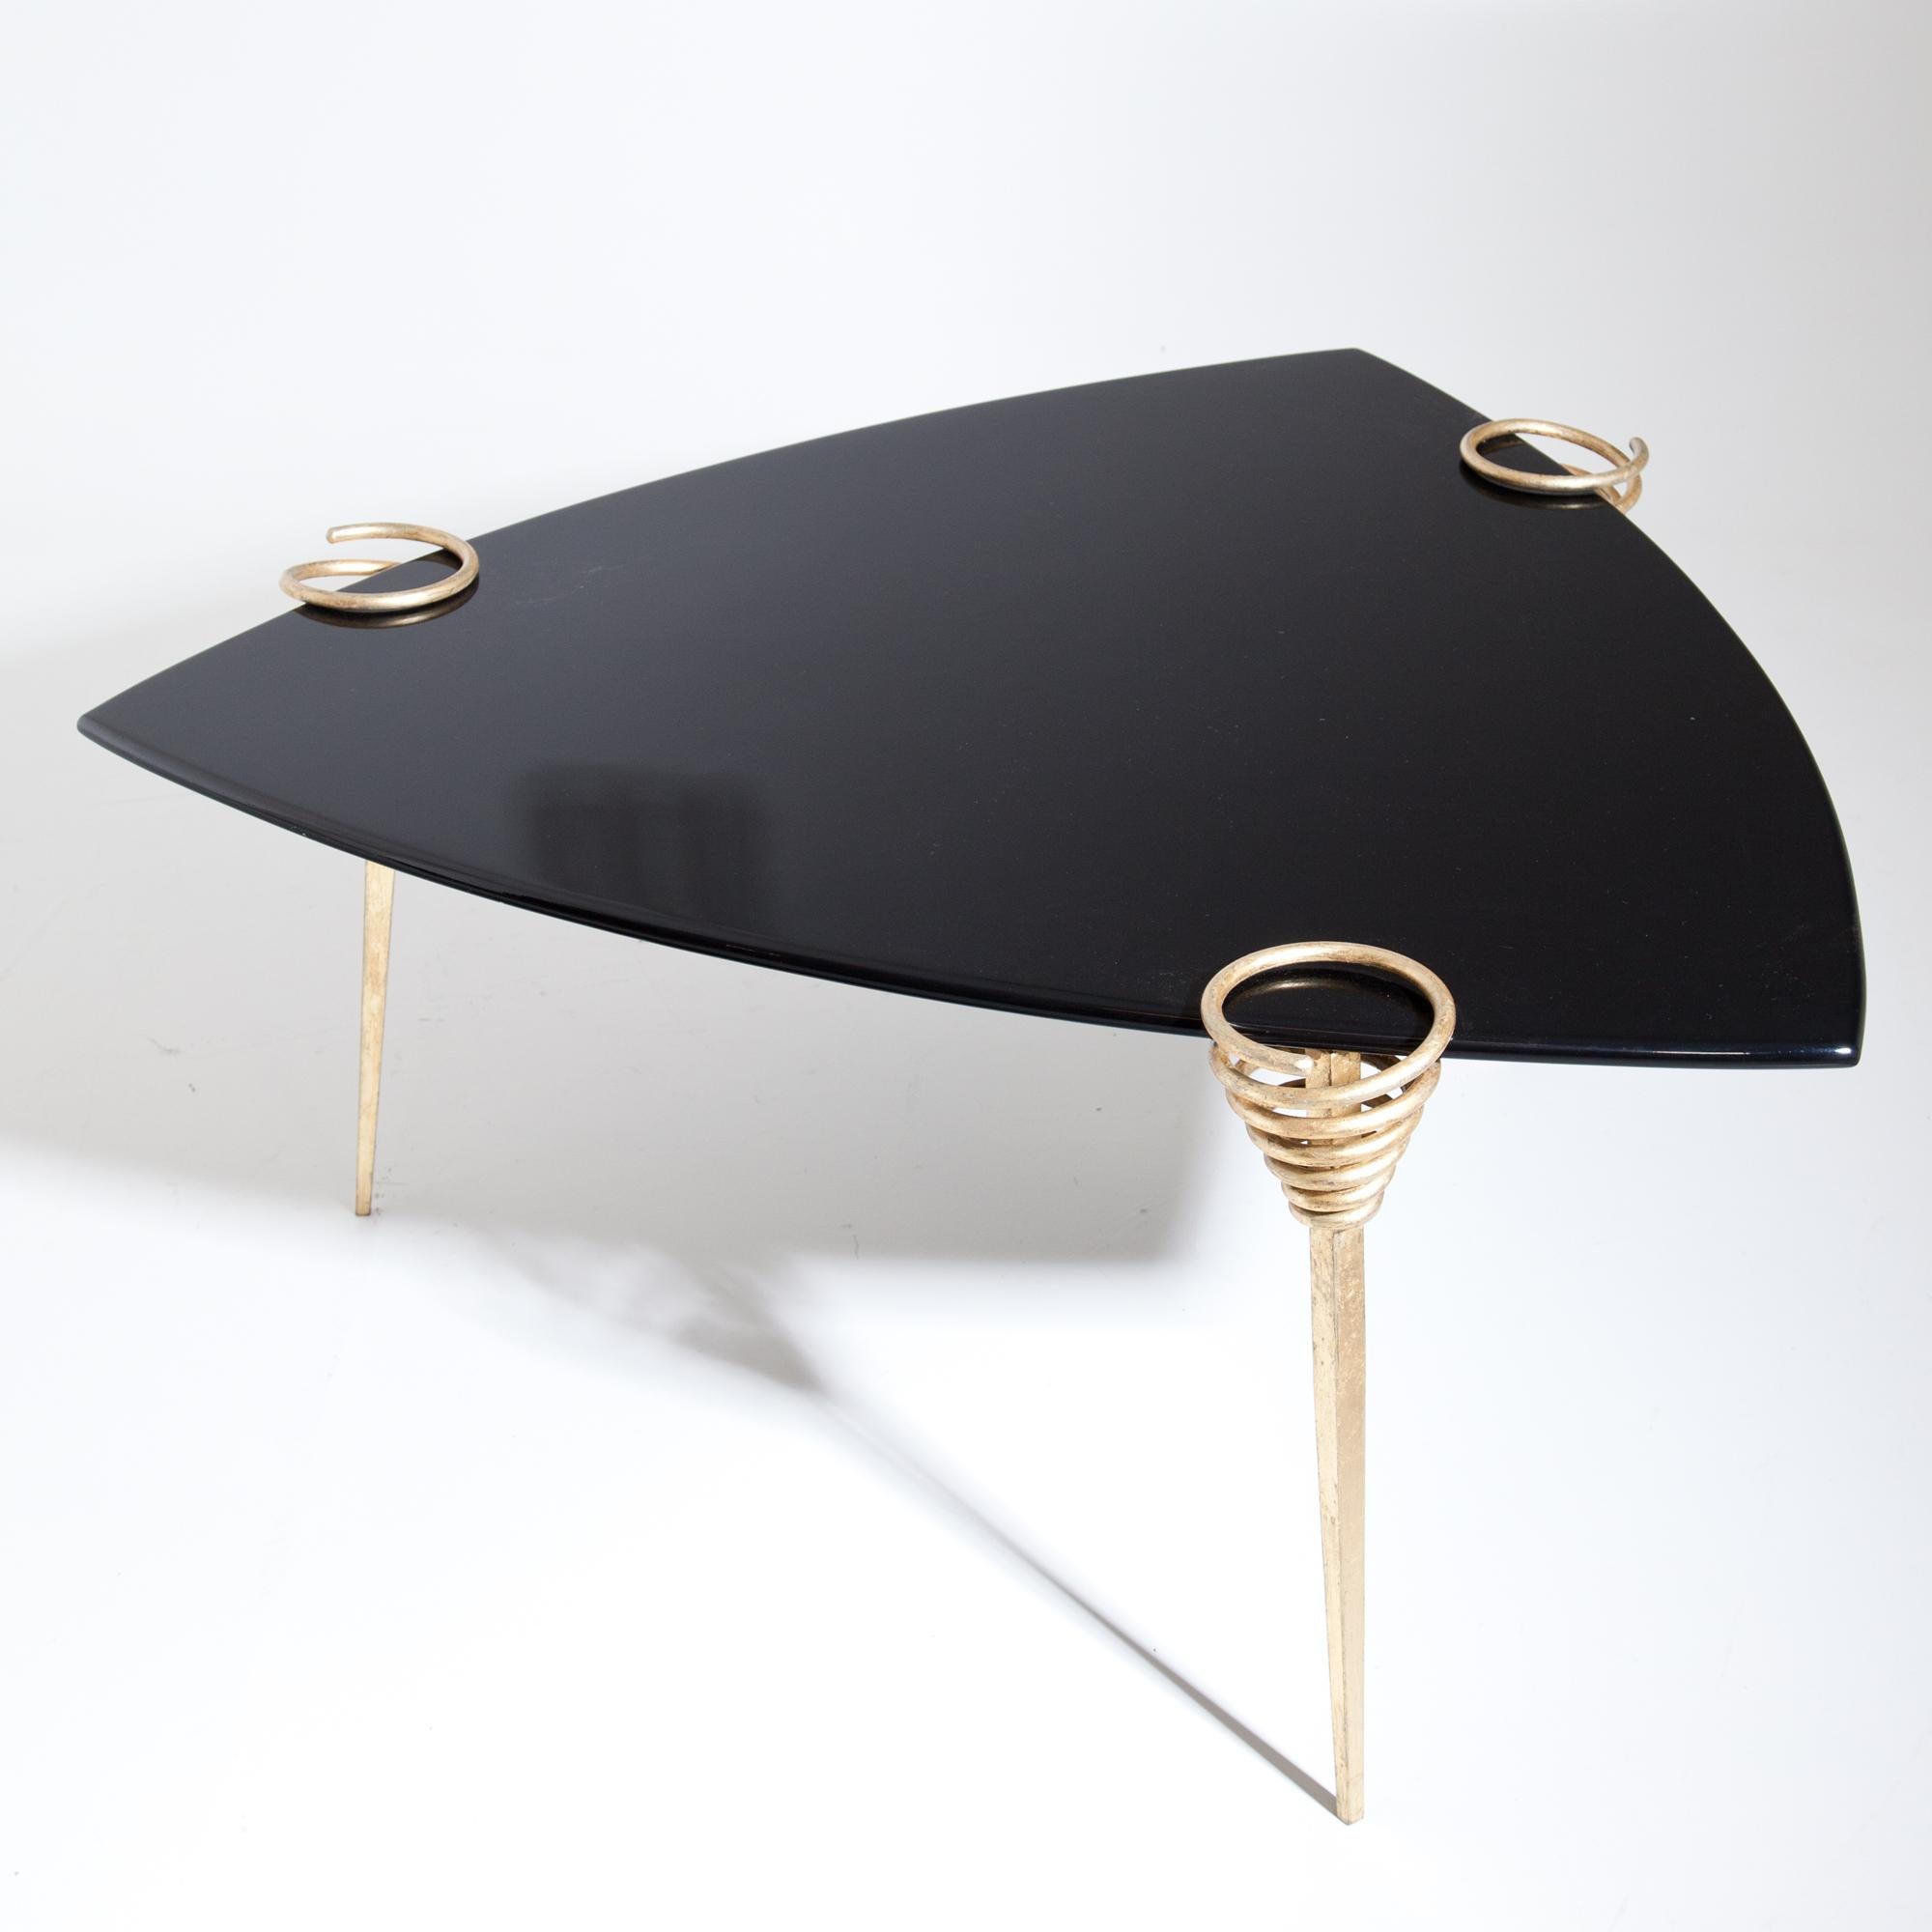 Coffee table with black triangular tabletop with convex sides standing on three legs. These are gold patinated and end in spirals that hold the tabletop.